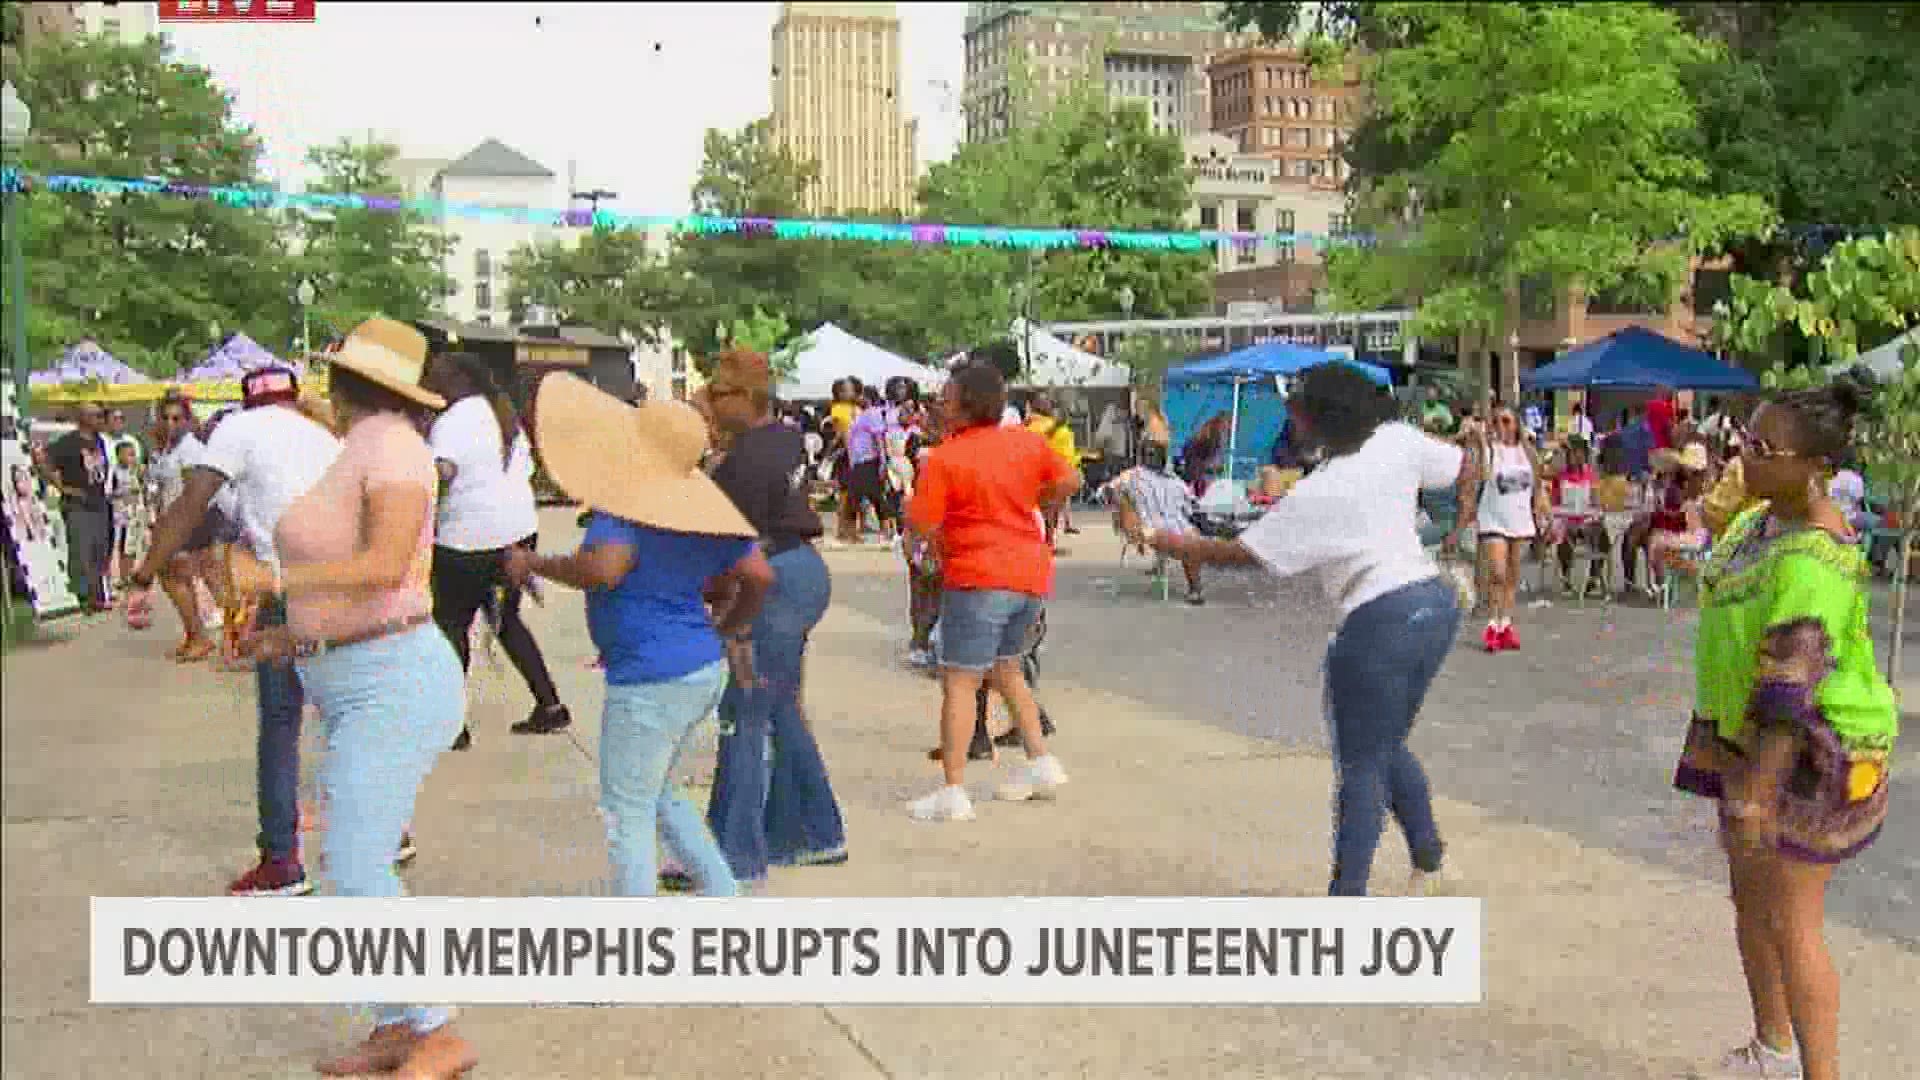 The festival is aimed at helping Black entrepreneurs and business owners through the Memphis area.